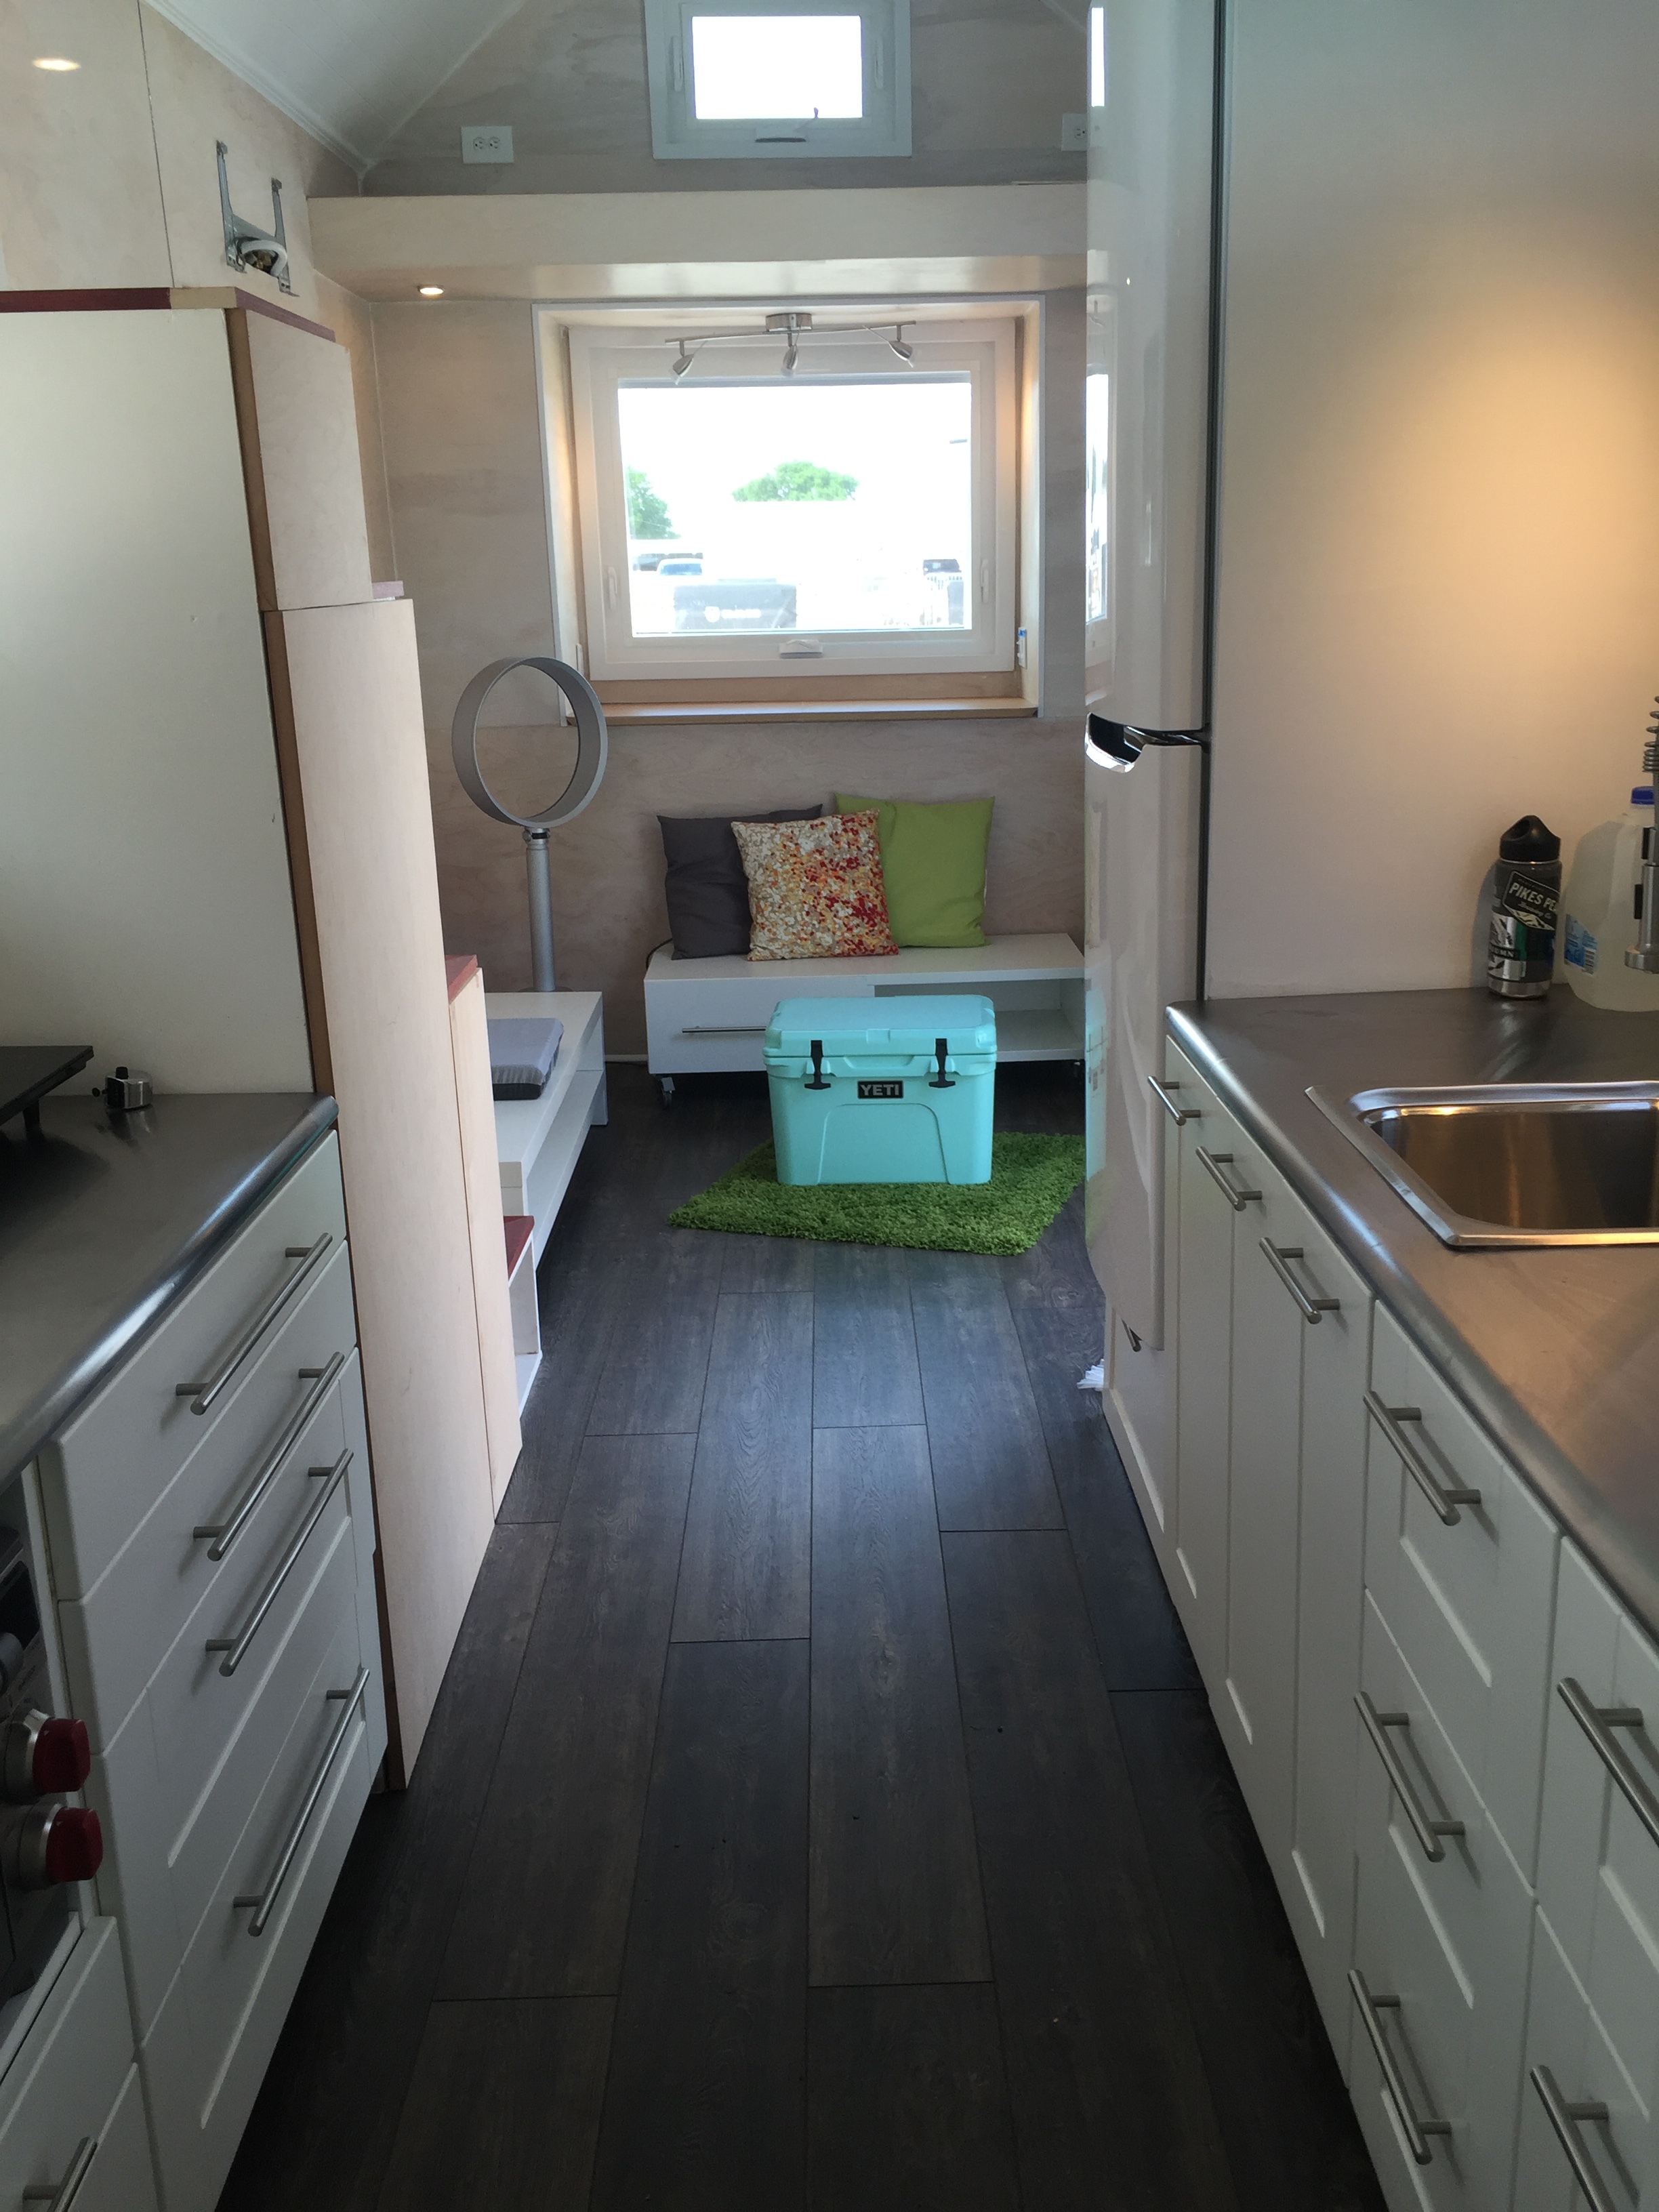 Using Ikea Cabinets In A Tiny House An, 12 Inch Deep Cabinet Ikea